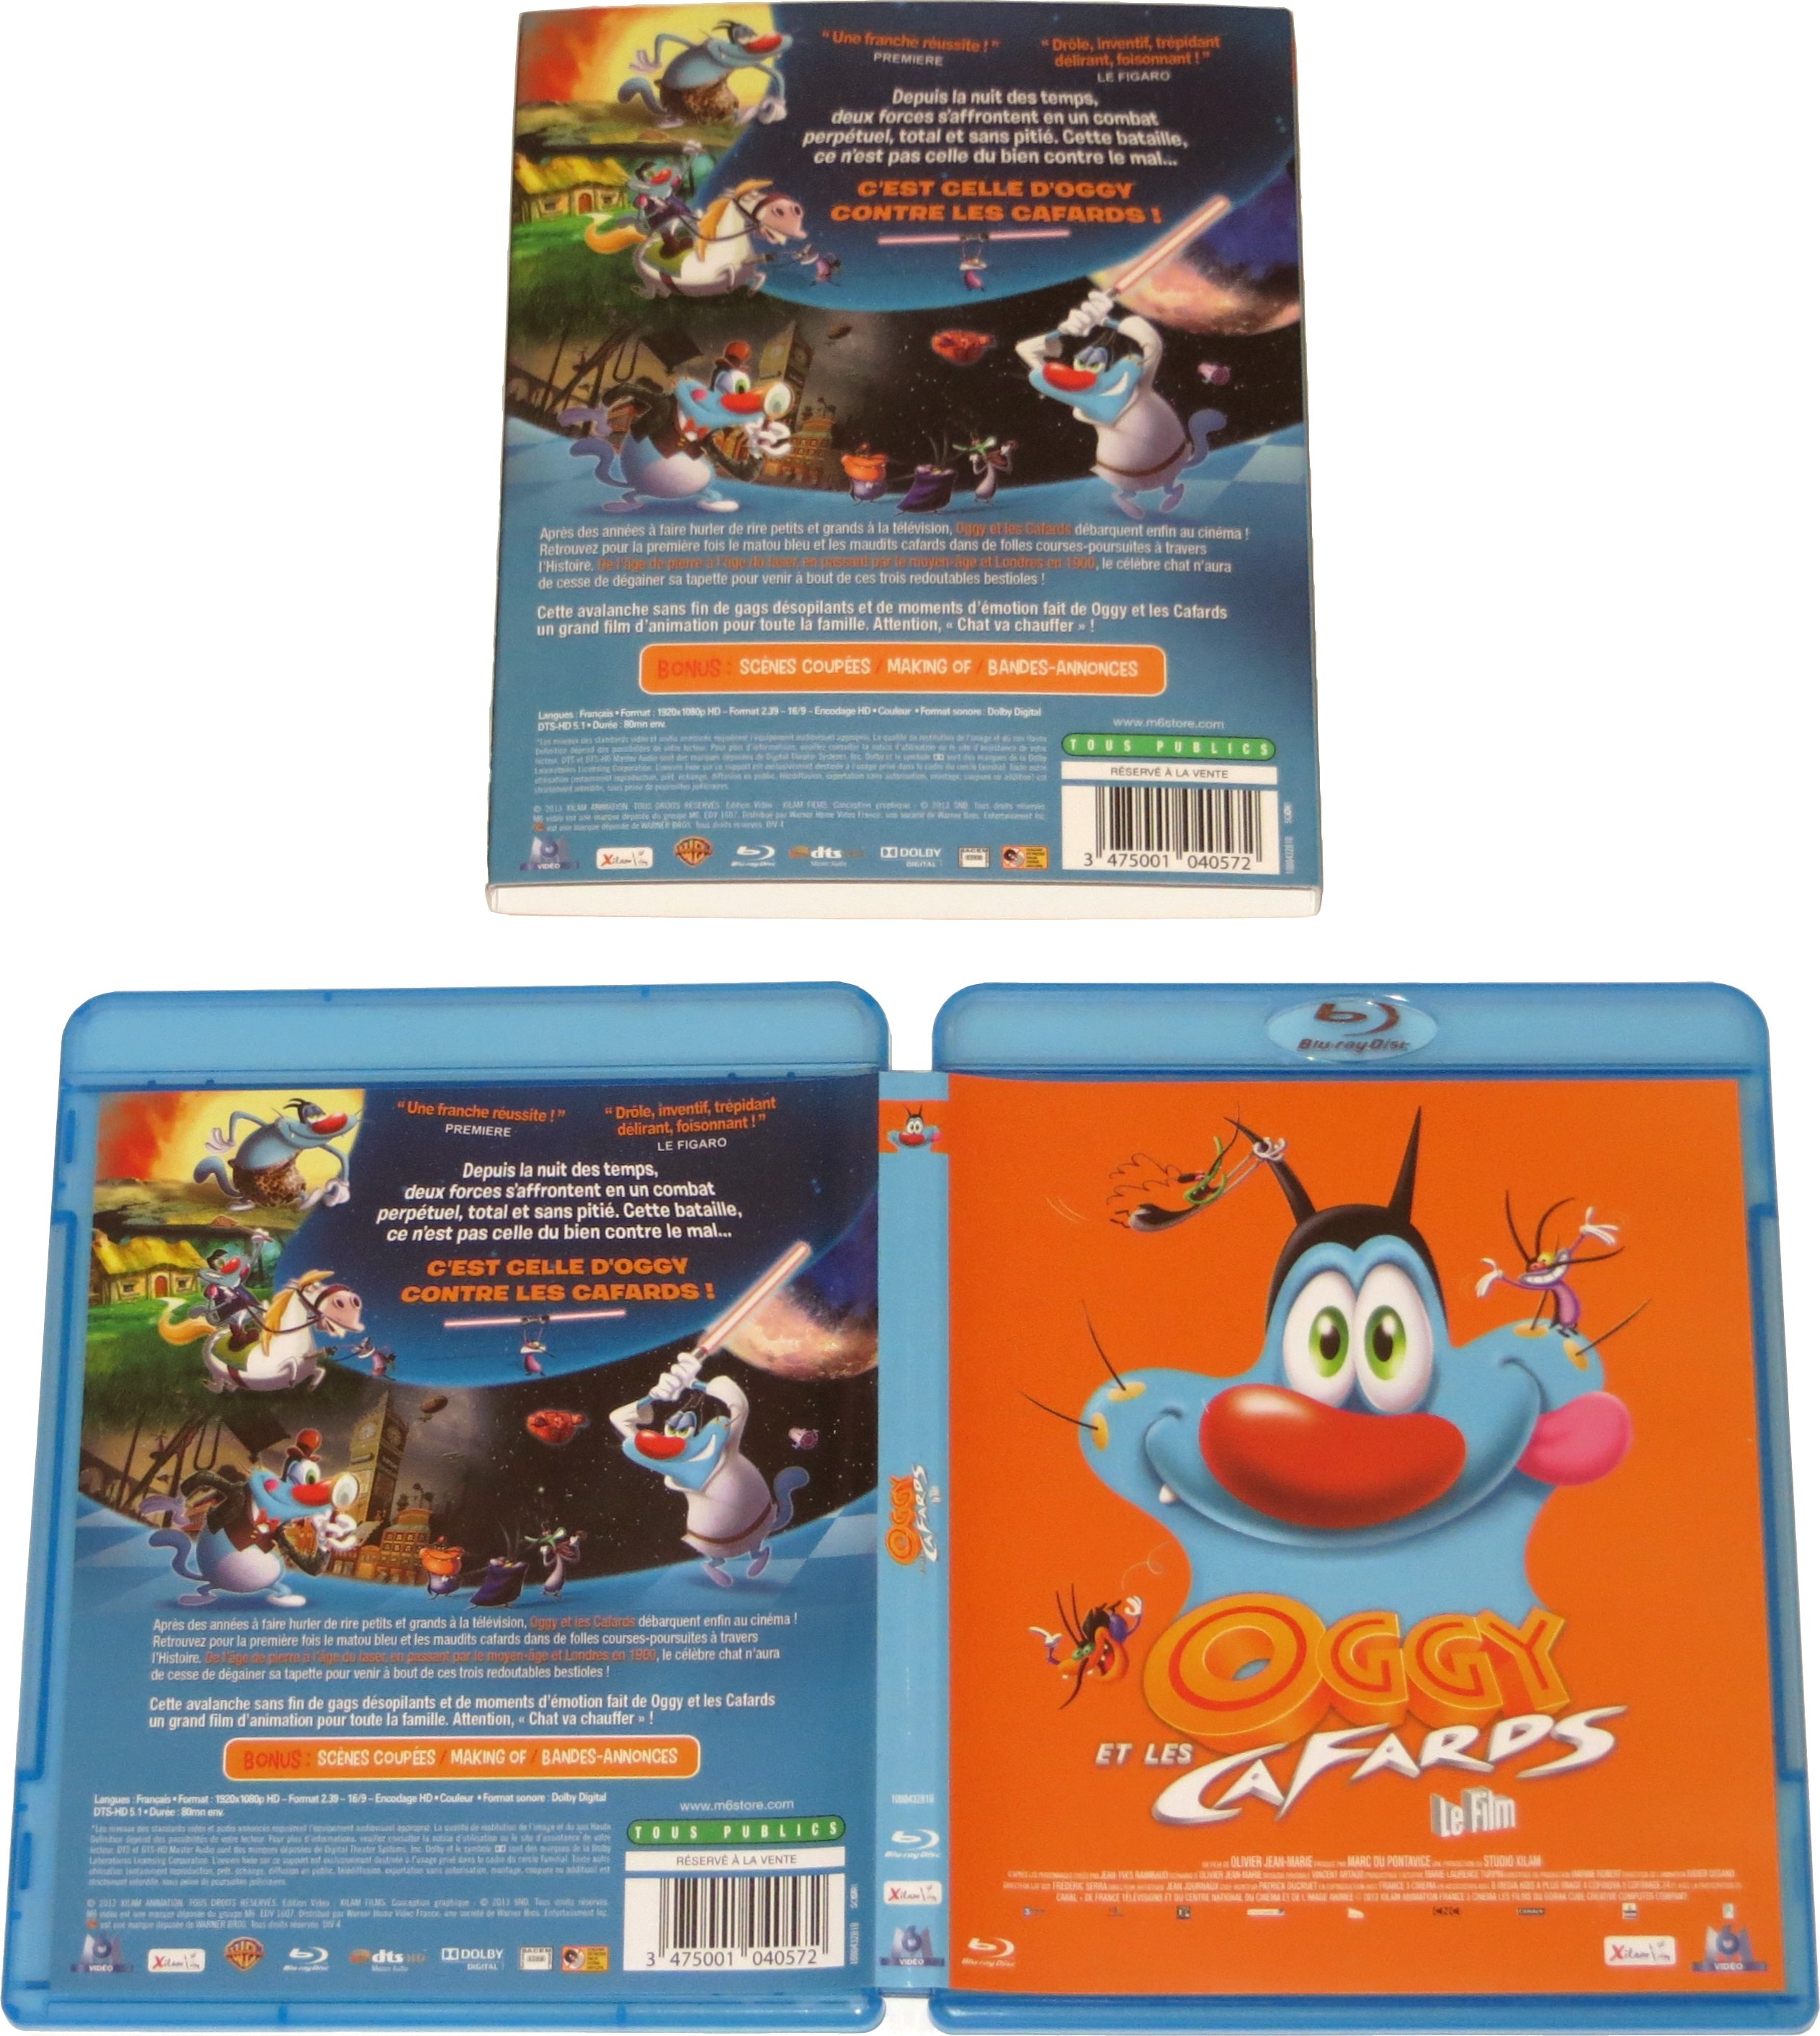 oggy and the cockroaches dvd